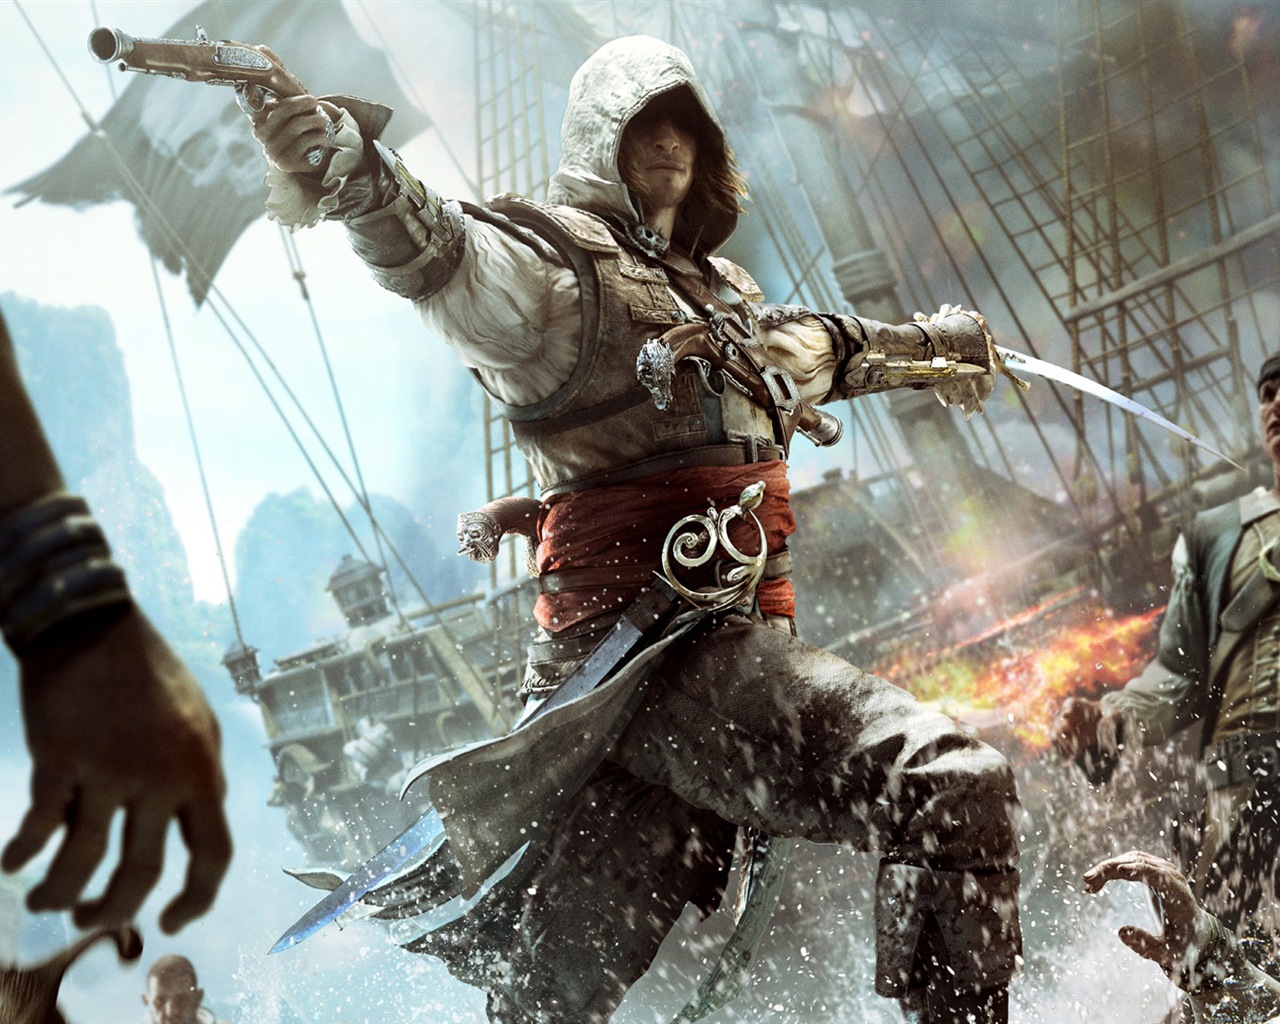 Creed IV Assassin: Black Flag HD wallpapers #6 - 1280x1024